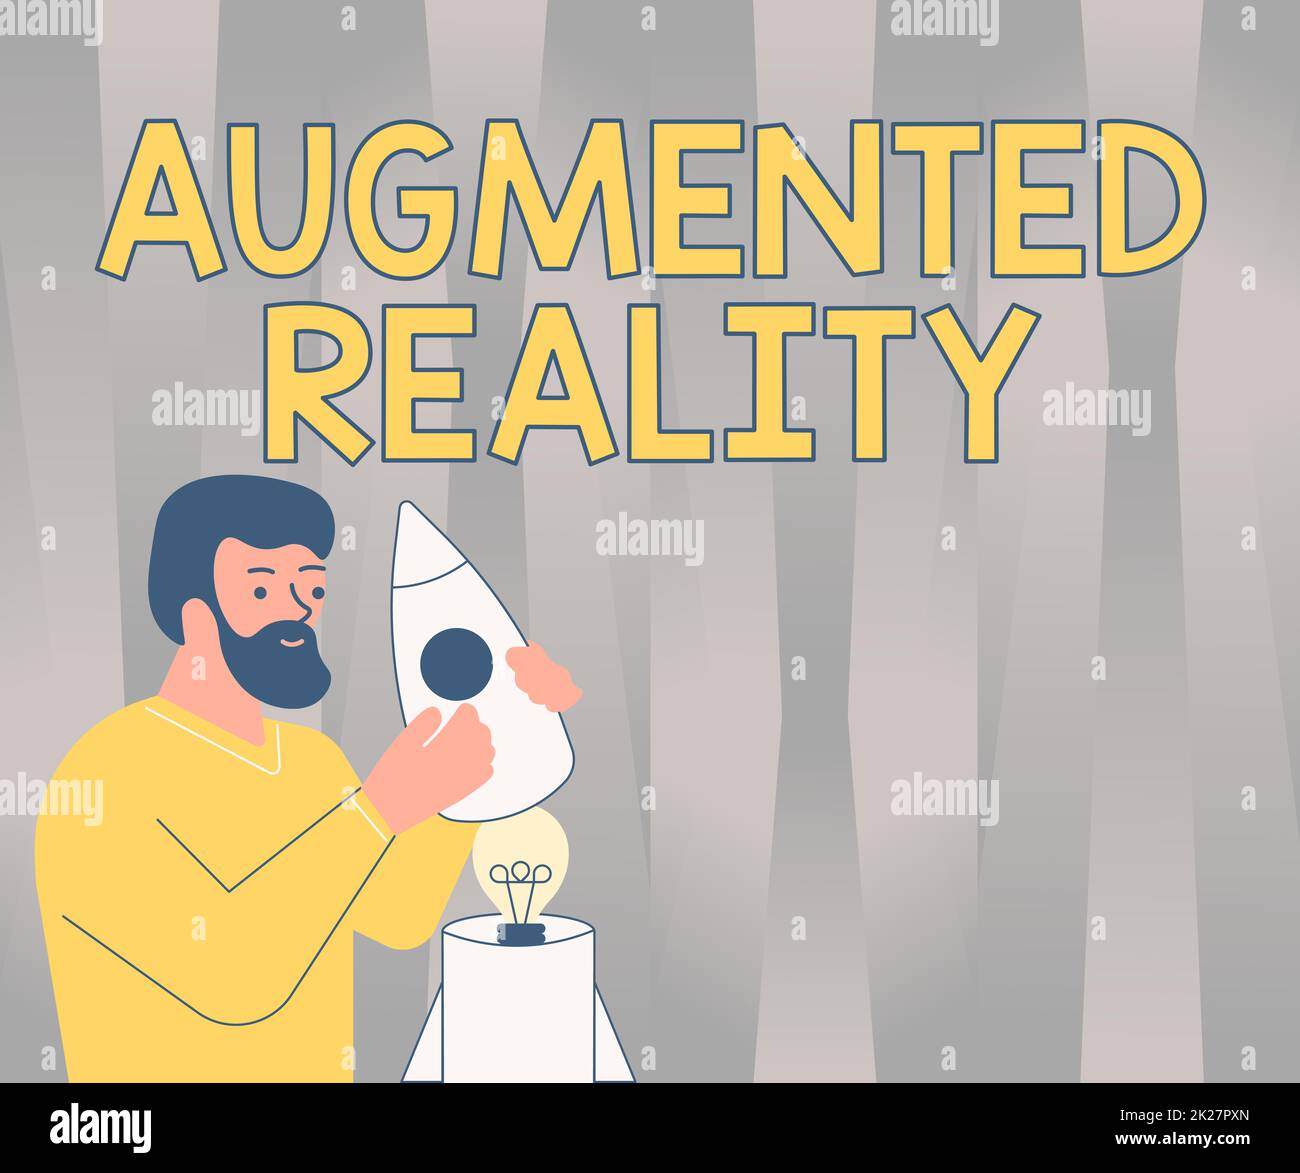 Sign displaying Augmented Reality. Word for technology that imposes computer image on the real world Illsutration Of Man Holding Rocketship Discovered Ideas Inside. Stock Photo